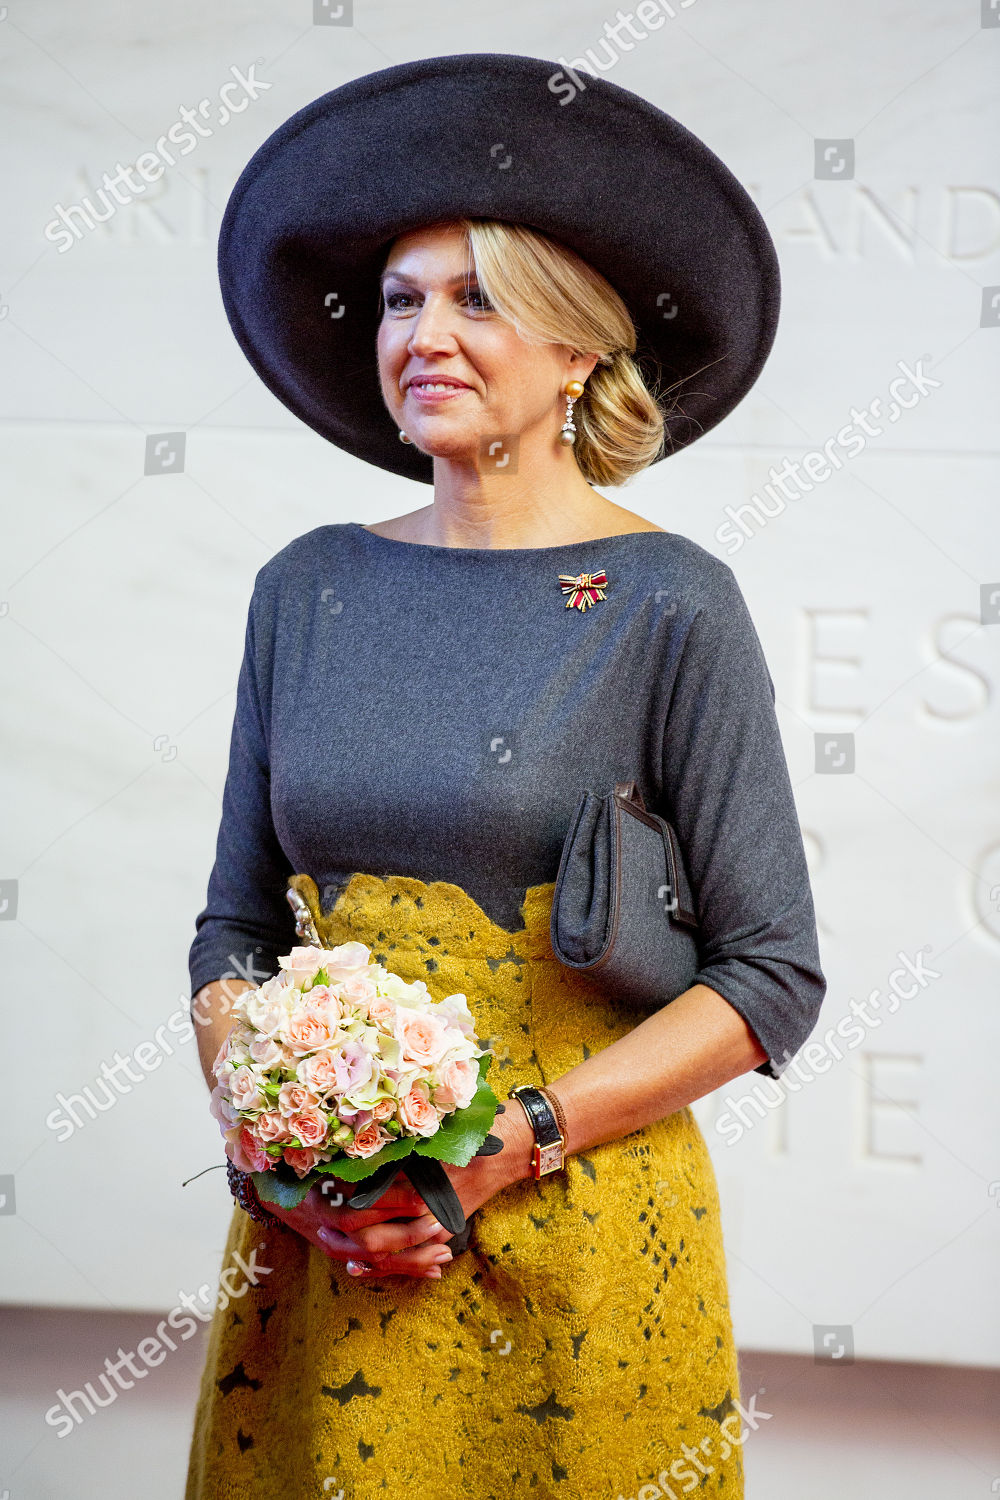 arrival-of-king-willem-alexander-and-queen-maxima-at-the-state-chancellery-of-rhineland-palatinate-mainz-germany-shutterstock-editorial-9921368y.jpg